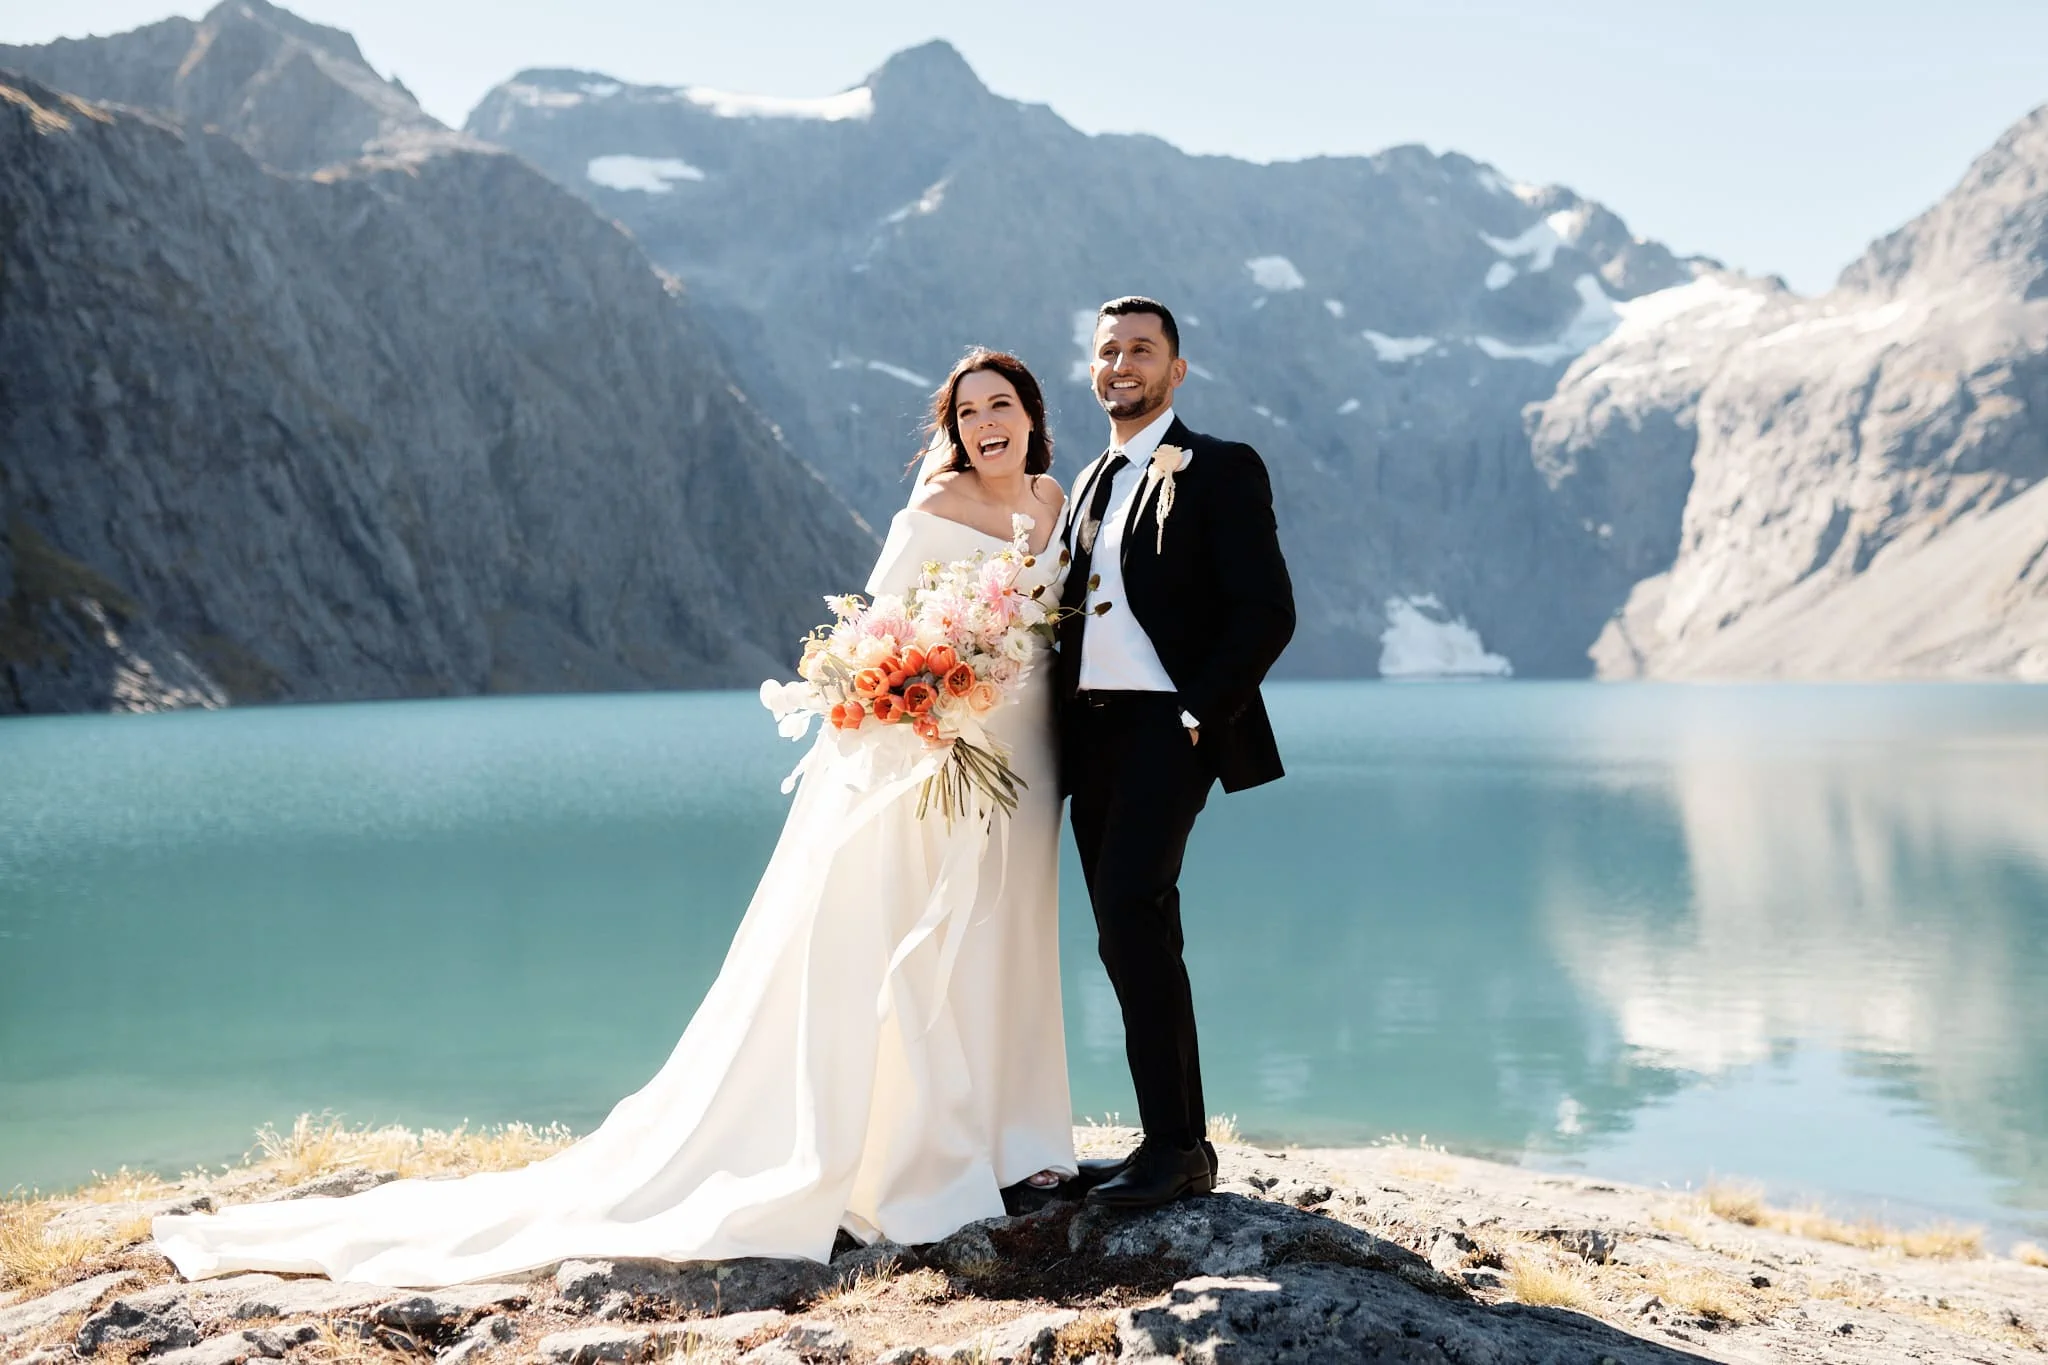 A bride and groom standing in front of mountains.